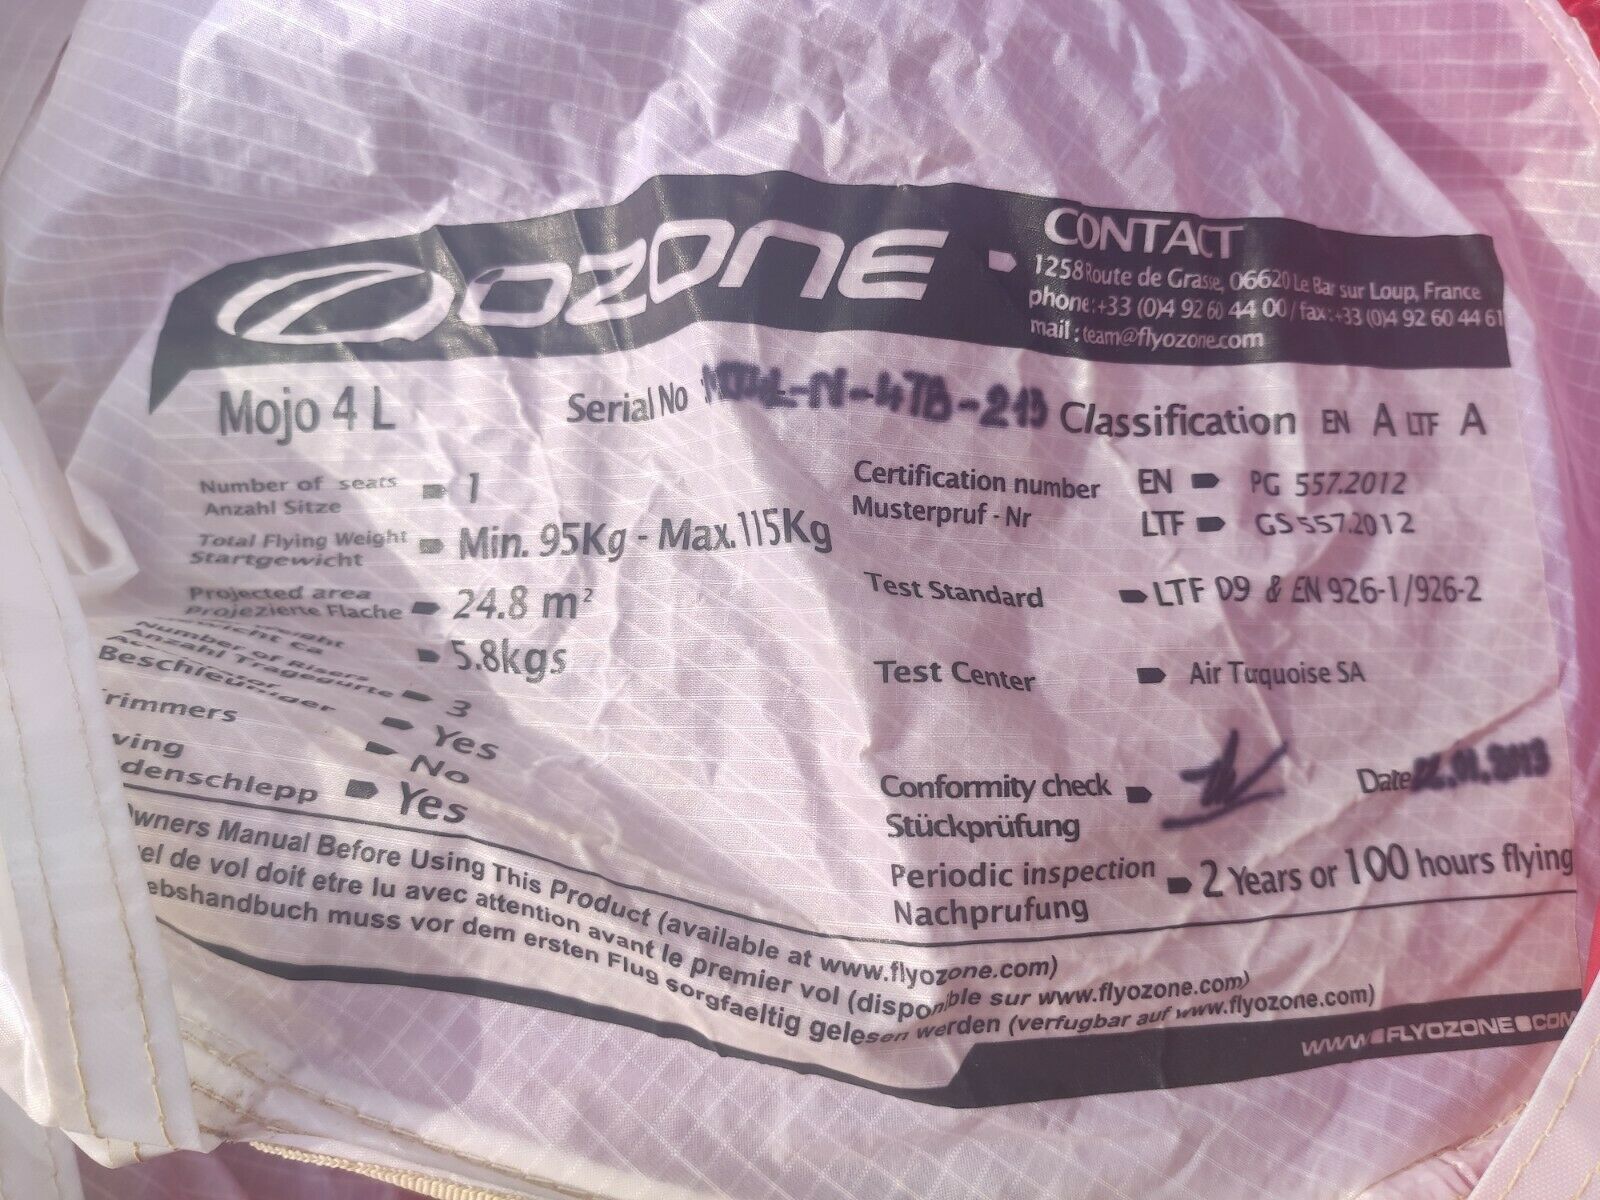 EN A Ozone Mojo 4 L beginner wing, used, very good condition